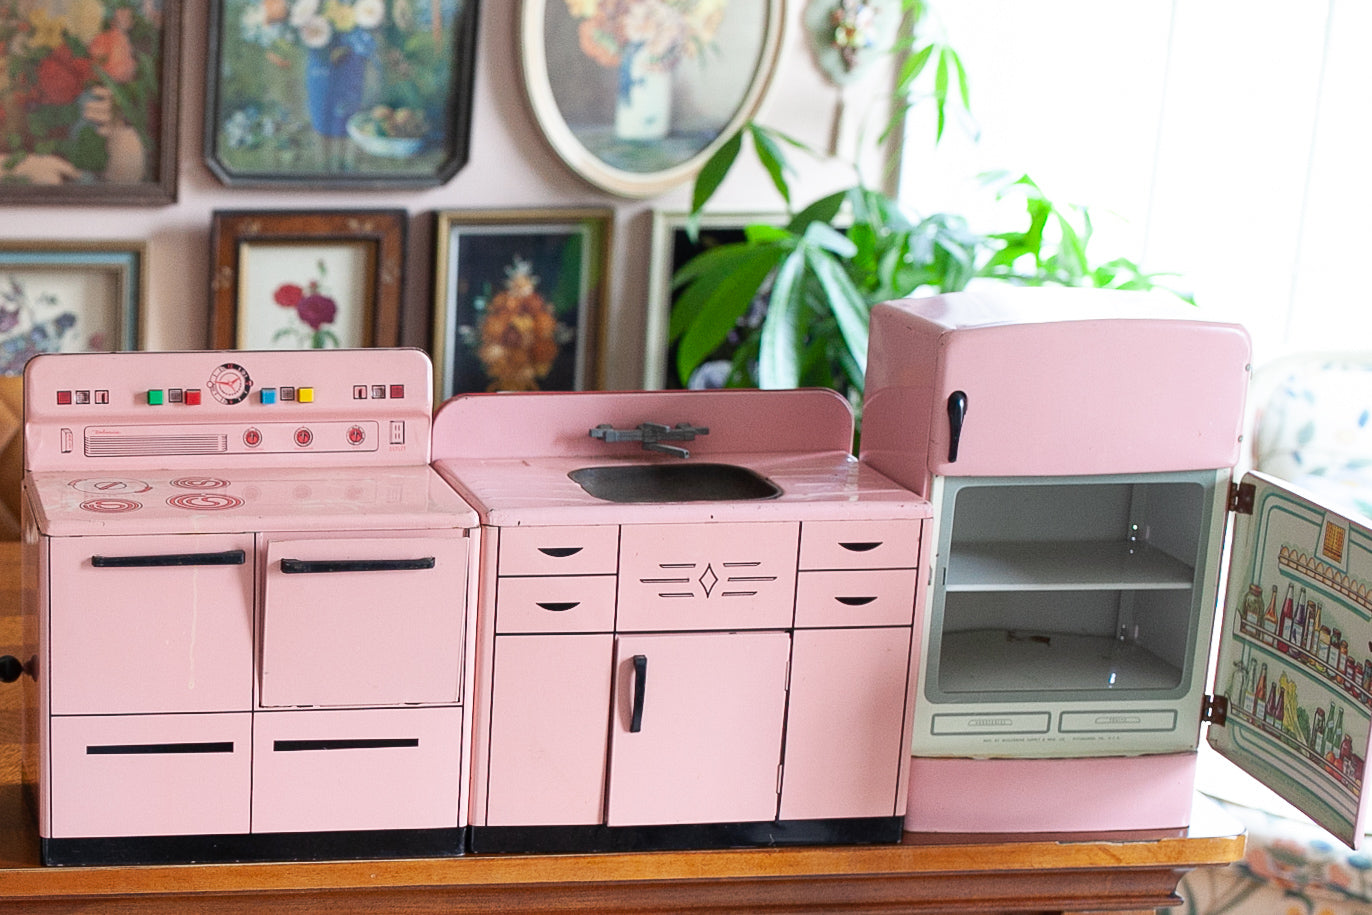 Vintage Pink Oven- Tin Stove- Pink Ovne - Pink Kitchen -Wolverine- Toy Stove